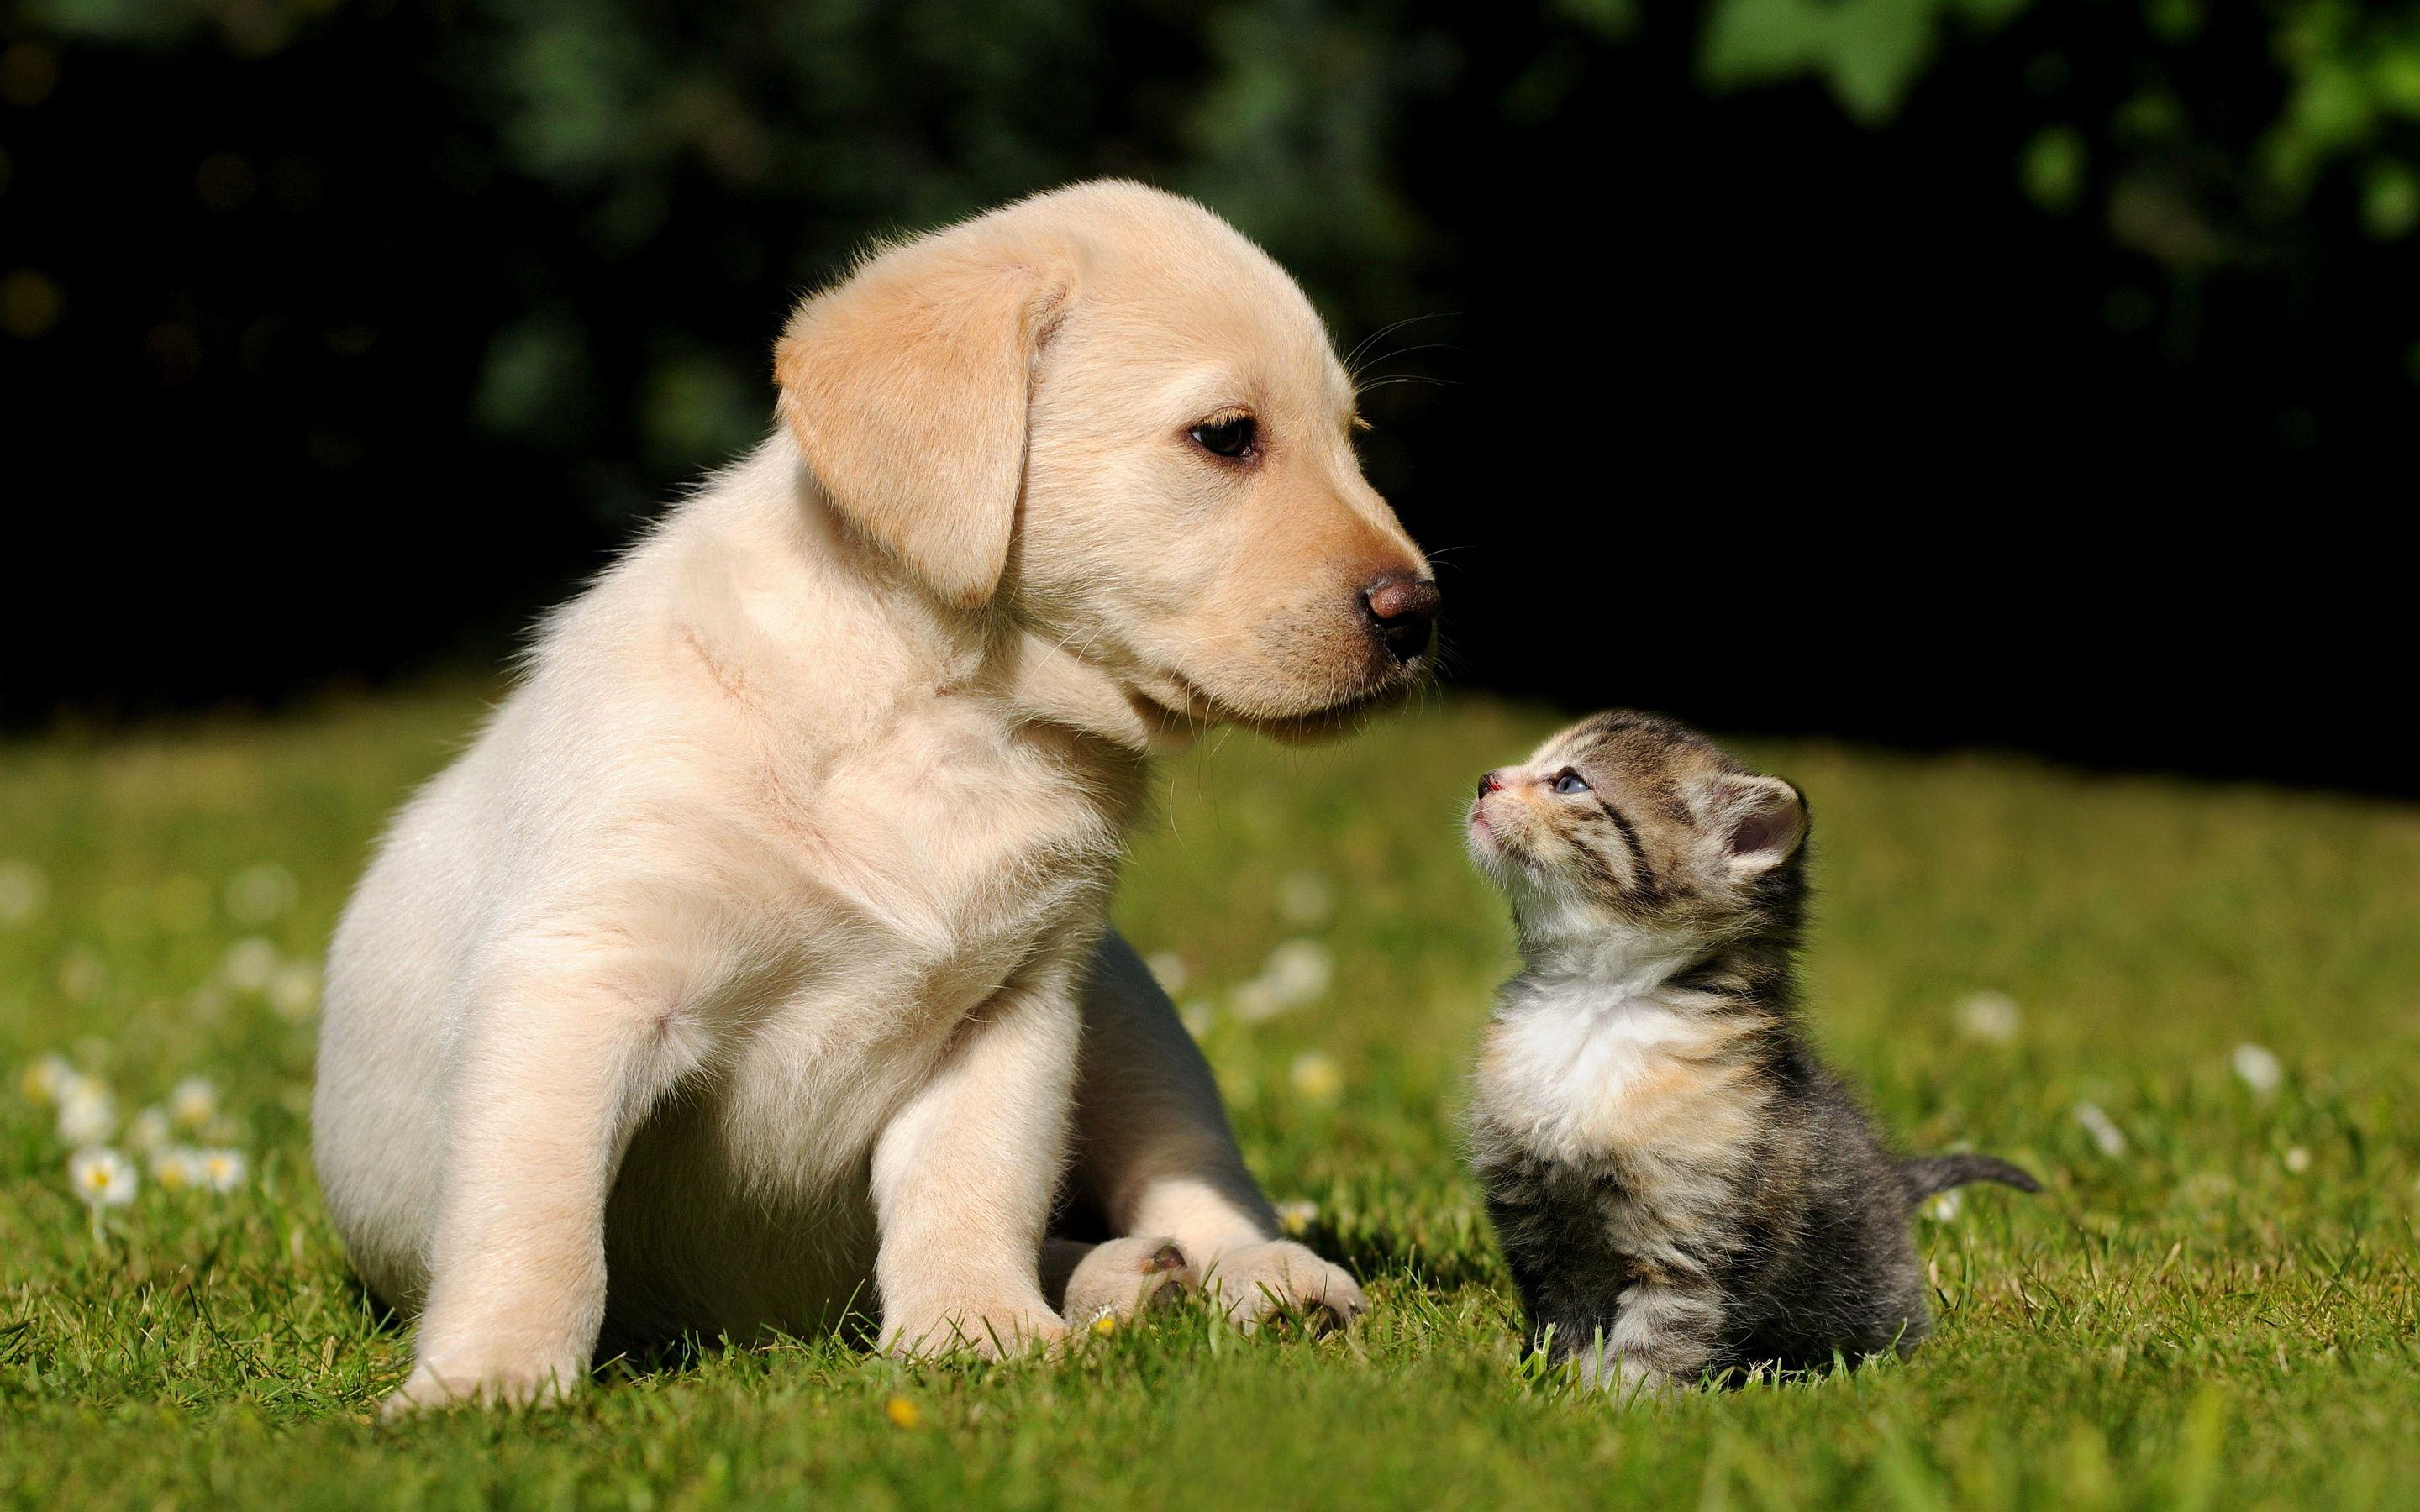 Kittens And Puppies Wallpaper With Kitten Puppy Full HD For Mobile